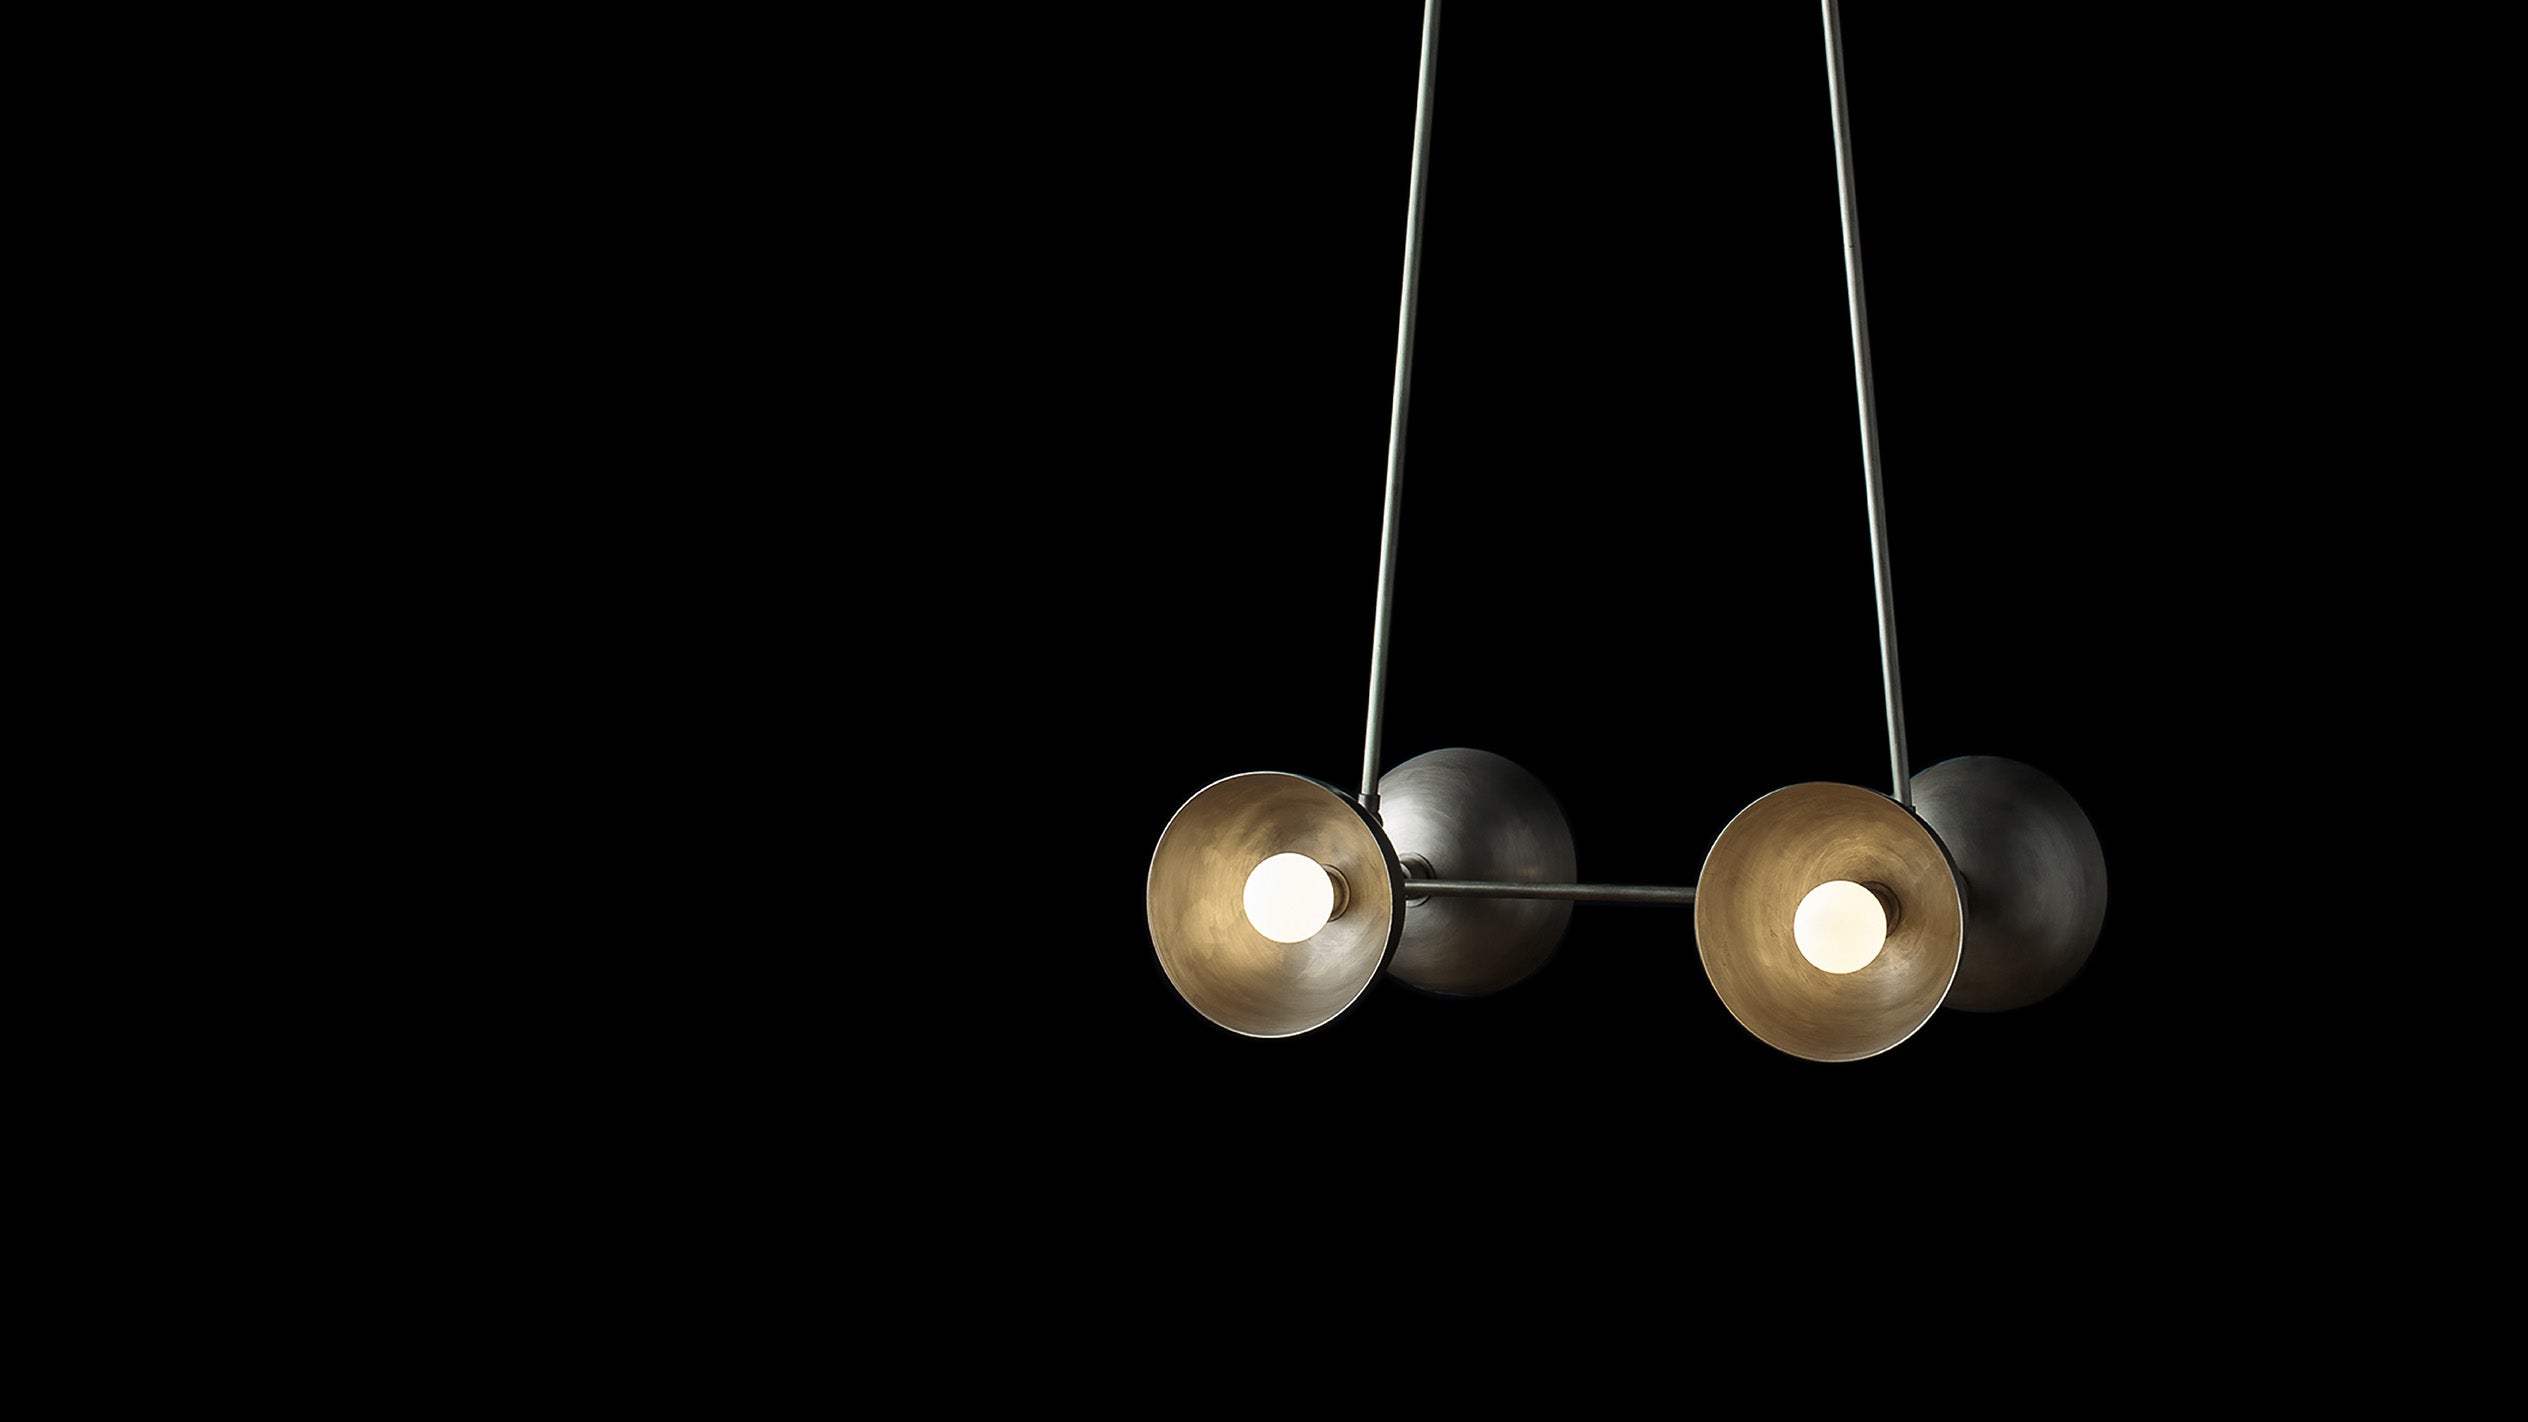 TRAPEZE : 4 ceiling pendant in Tarnished Silver finish hanging against a black background. 